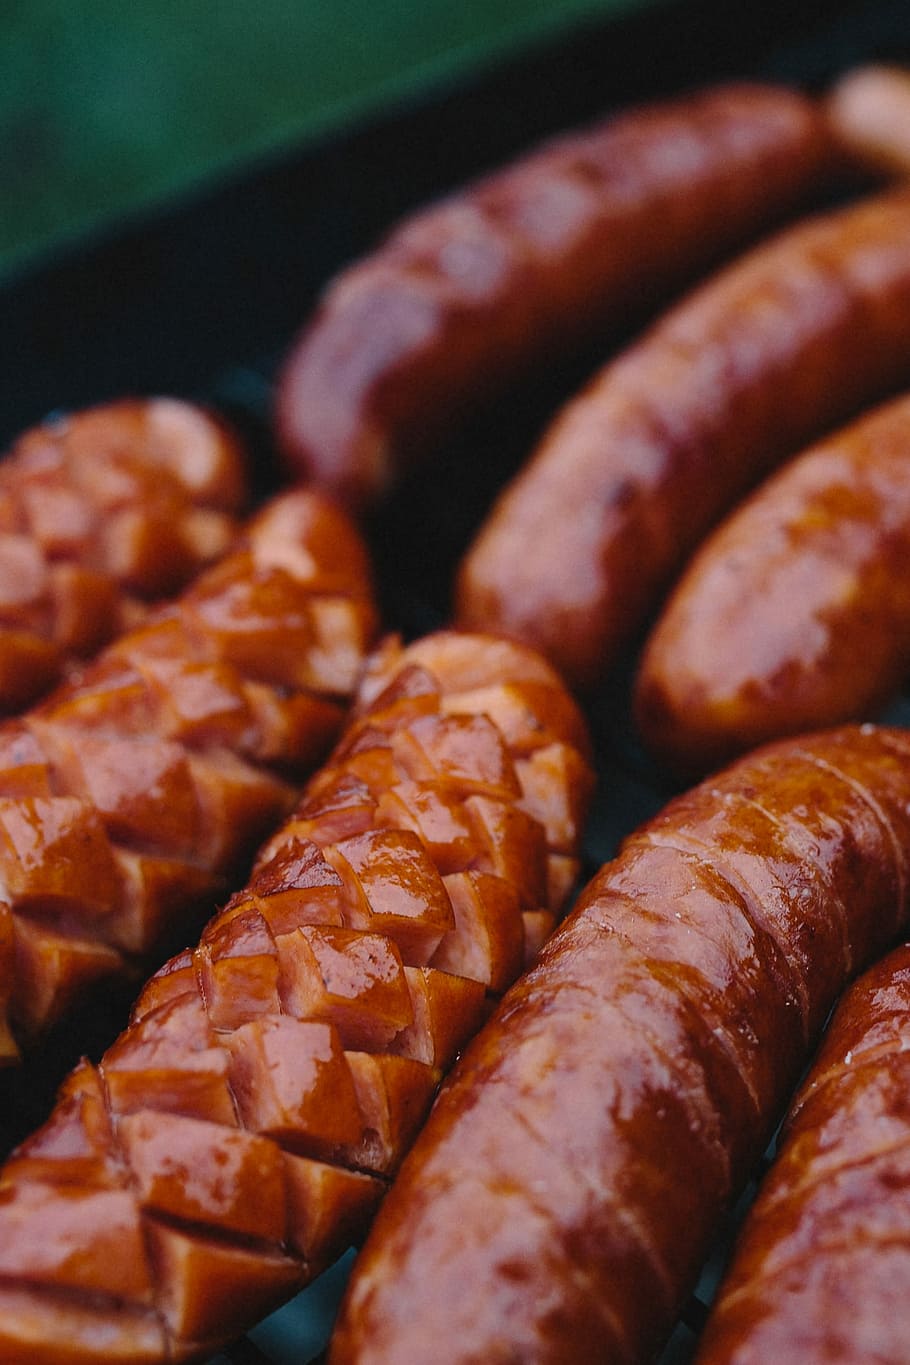 grill, Sausages, sausage, food, kielbasa, barbecue, cook, fire, flame, grilling